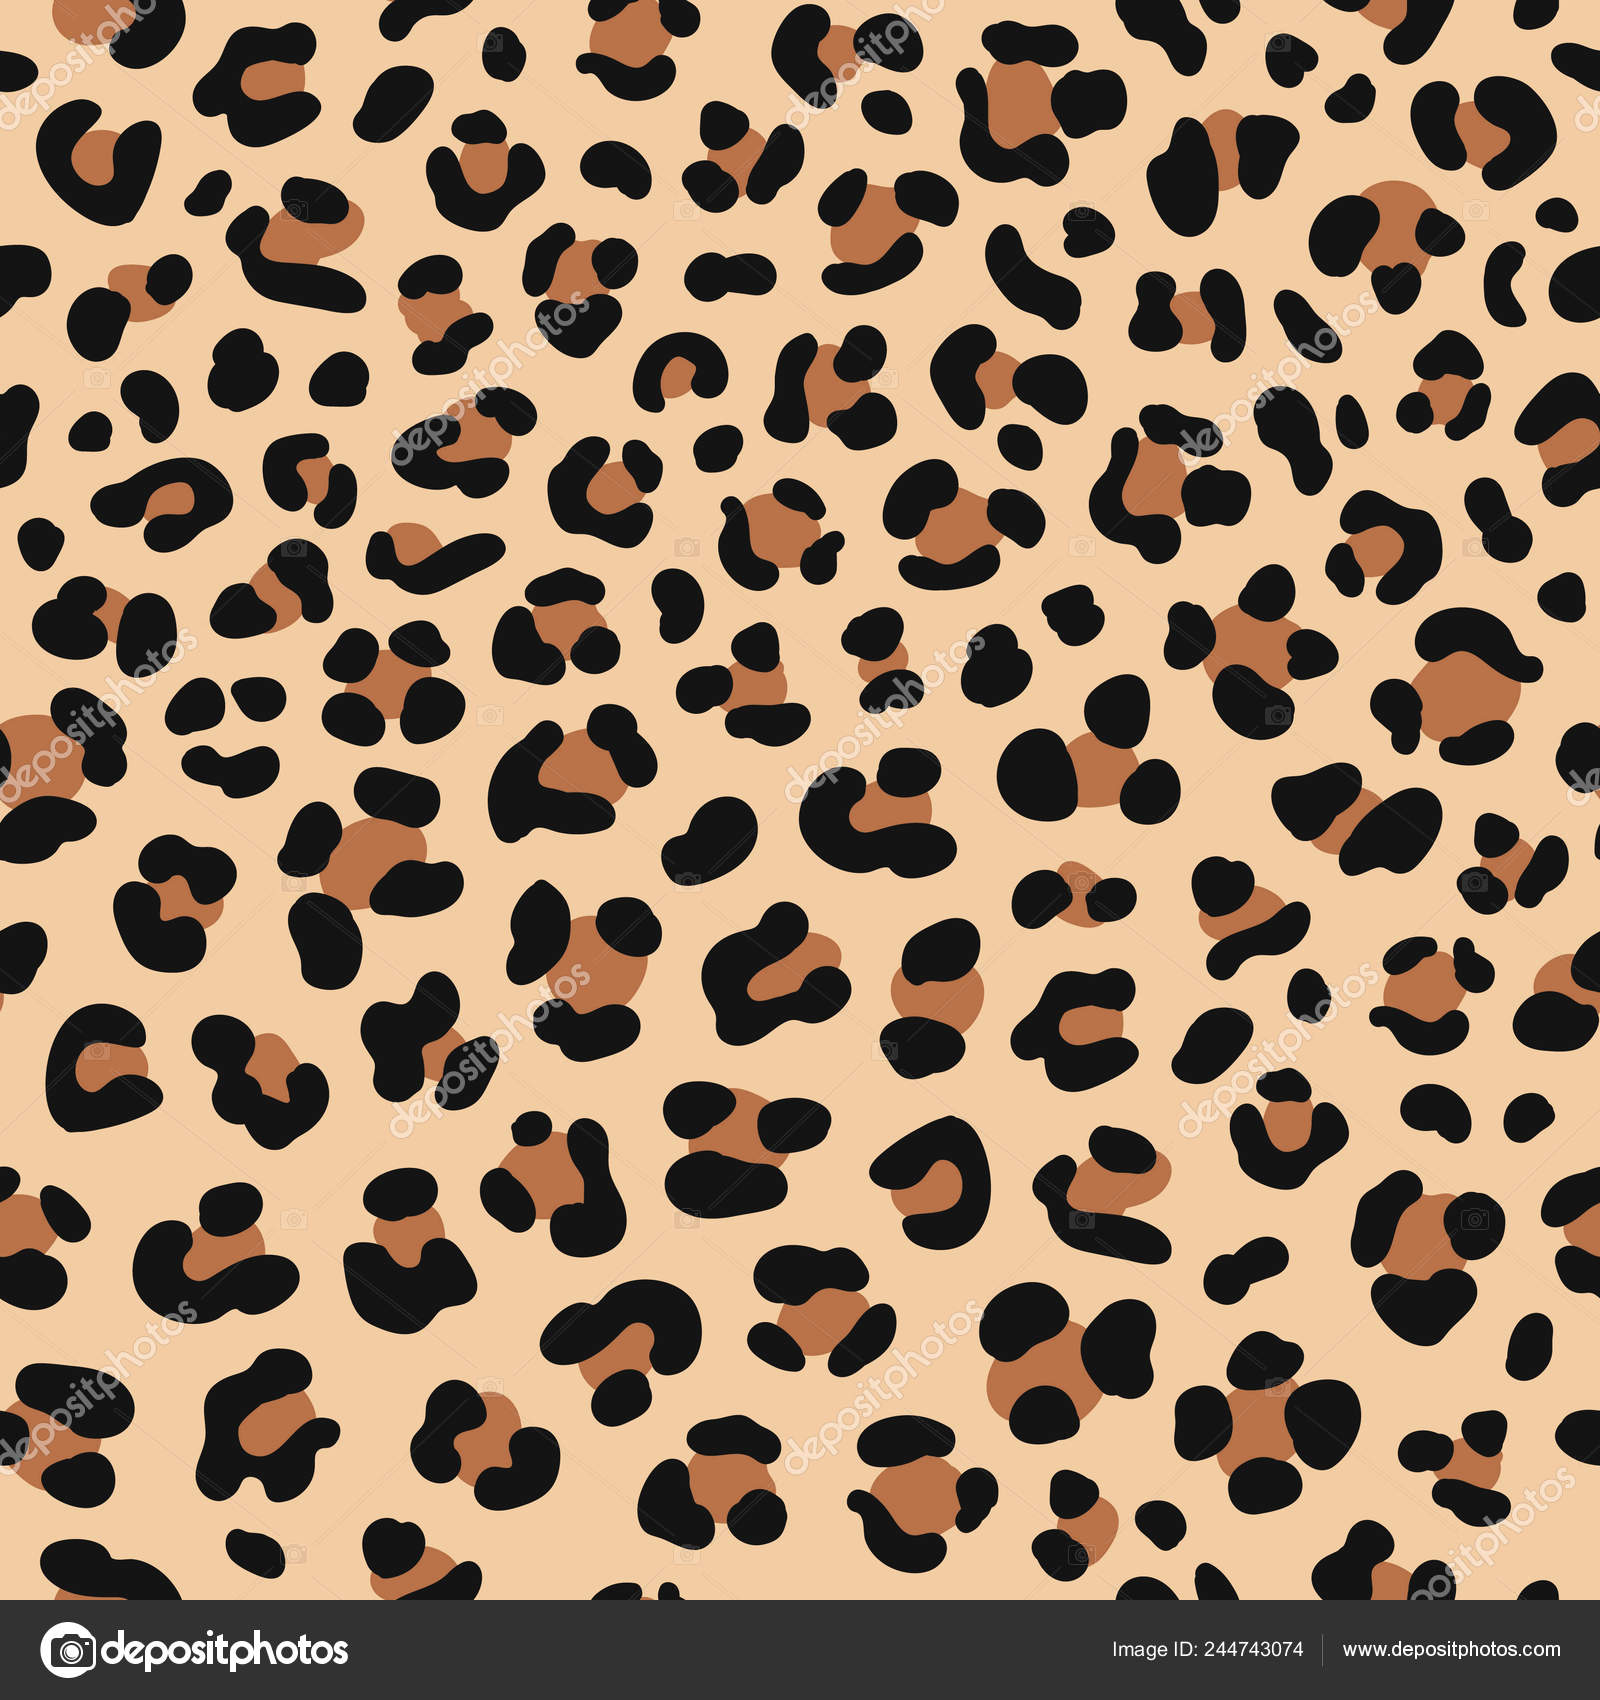 Seamless Pink Leopard Skin Pattern For Fashion Prints Posters